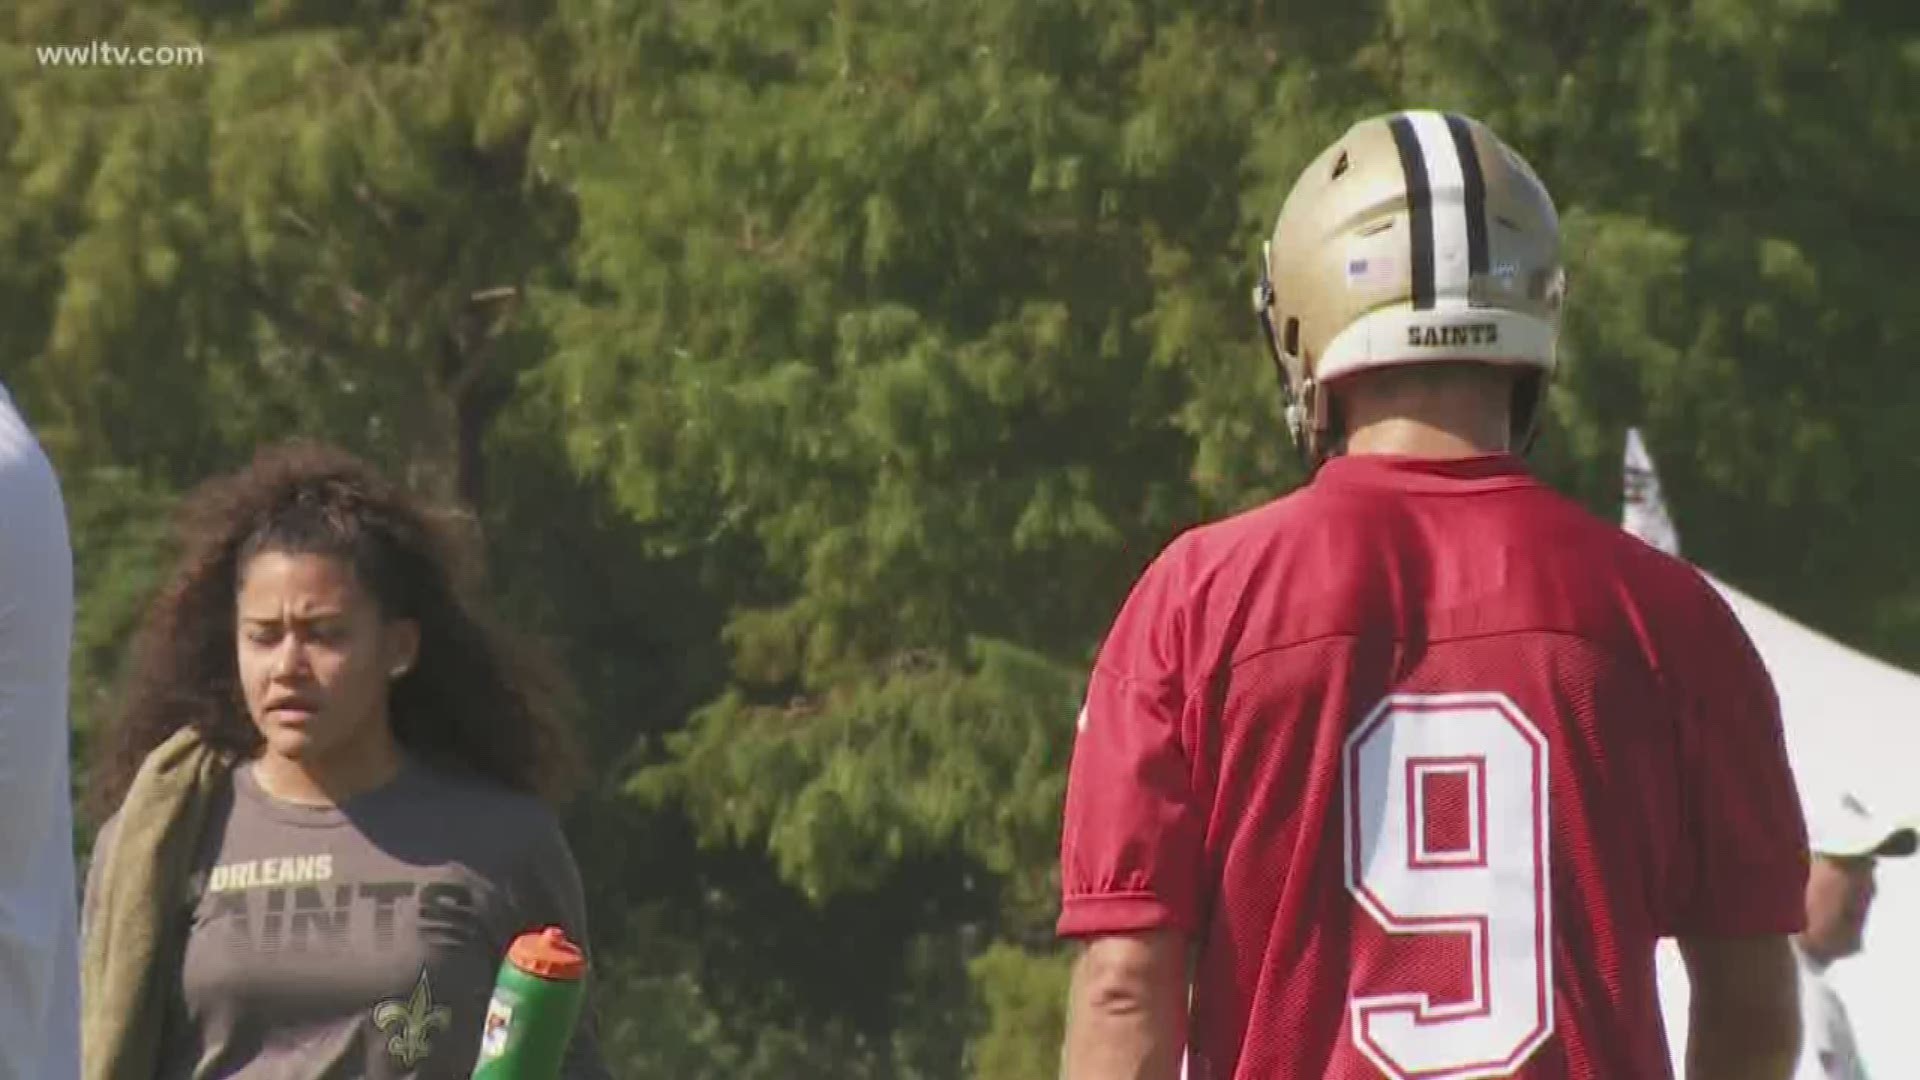 WWL-TV Sports Director Doug Mouton explains why this year could be the year for the Saints and No. 9.